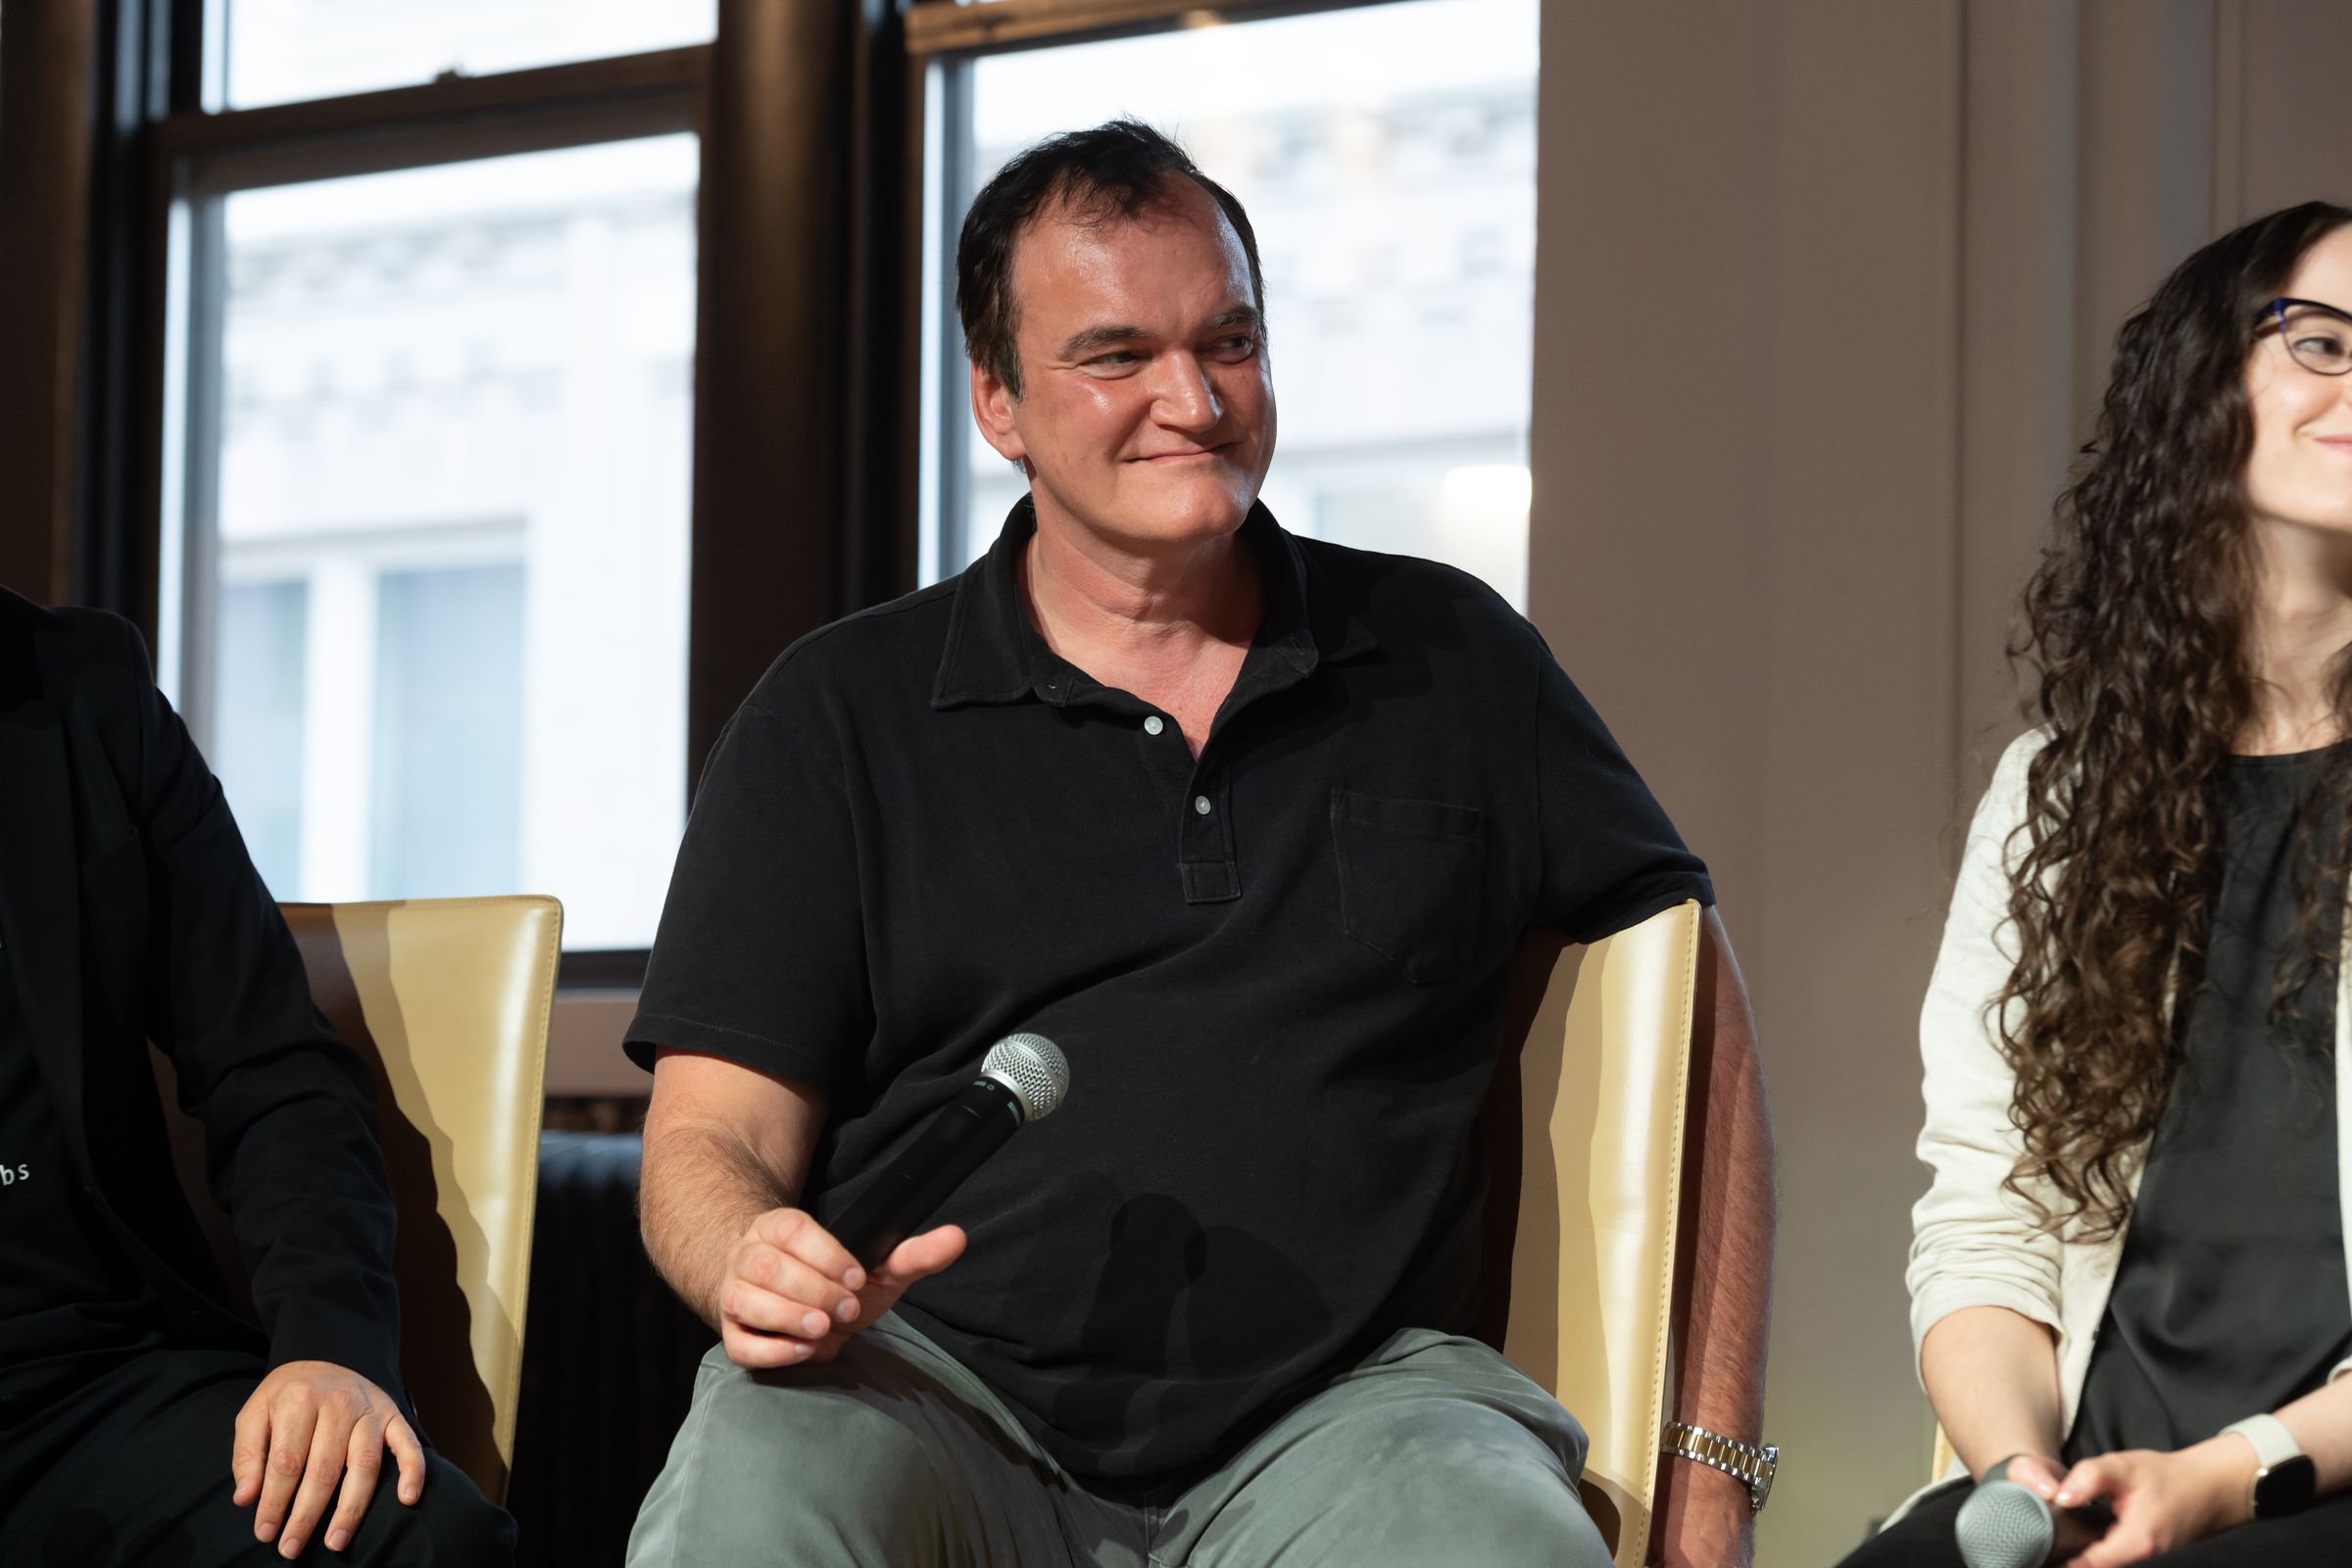 Quentin Tarantino Speaks At Panel Discussion On “Pulp Fiction” NFTs